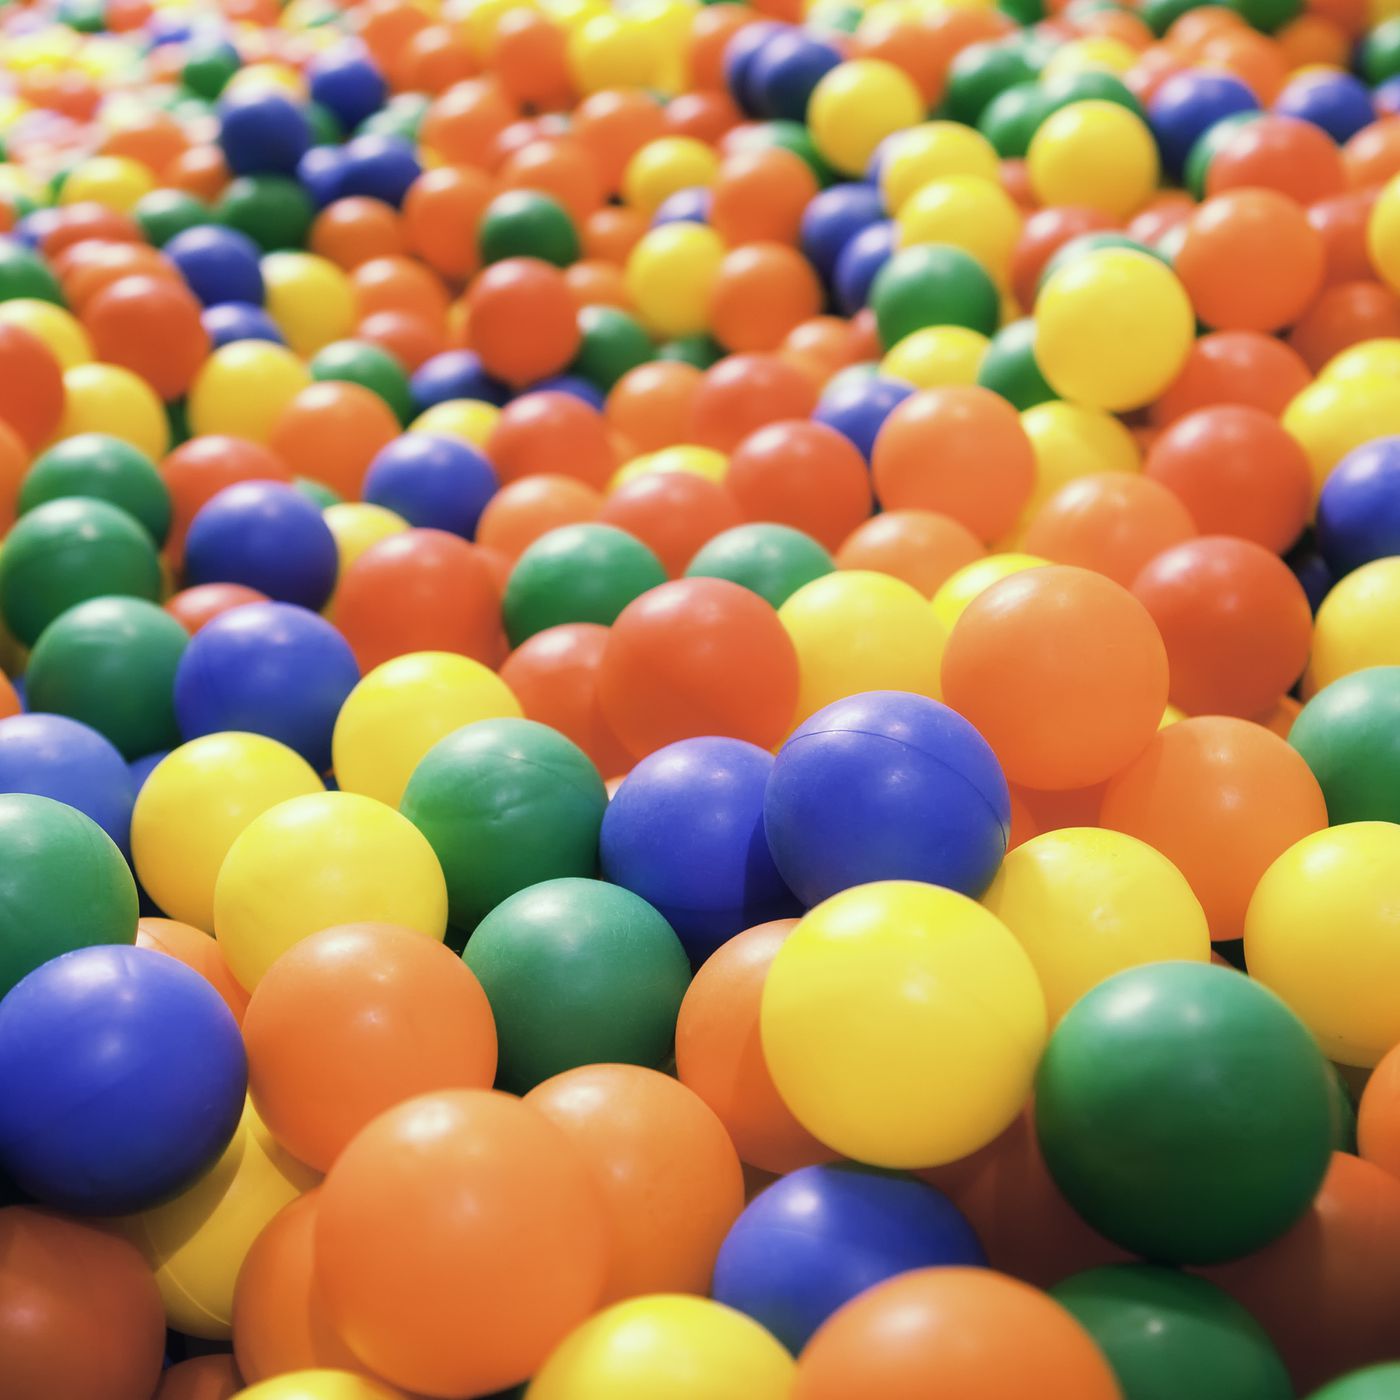 A history of the ball pit, a staple of McDonald's PlayPlaces and Chuck E. Cheeses